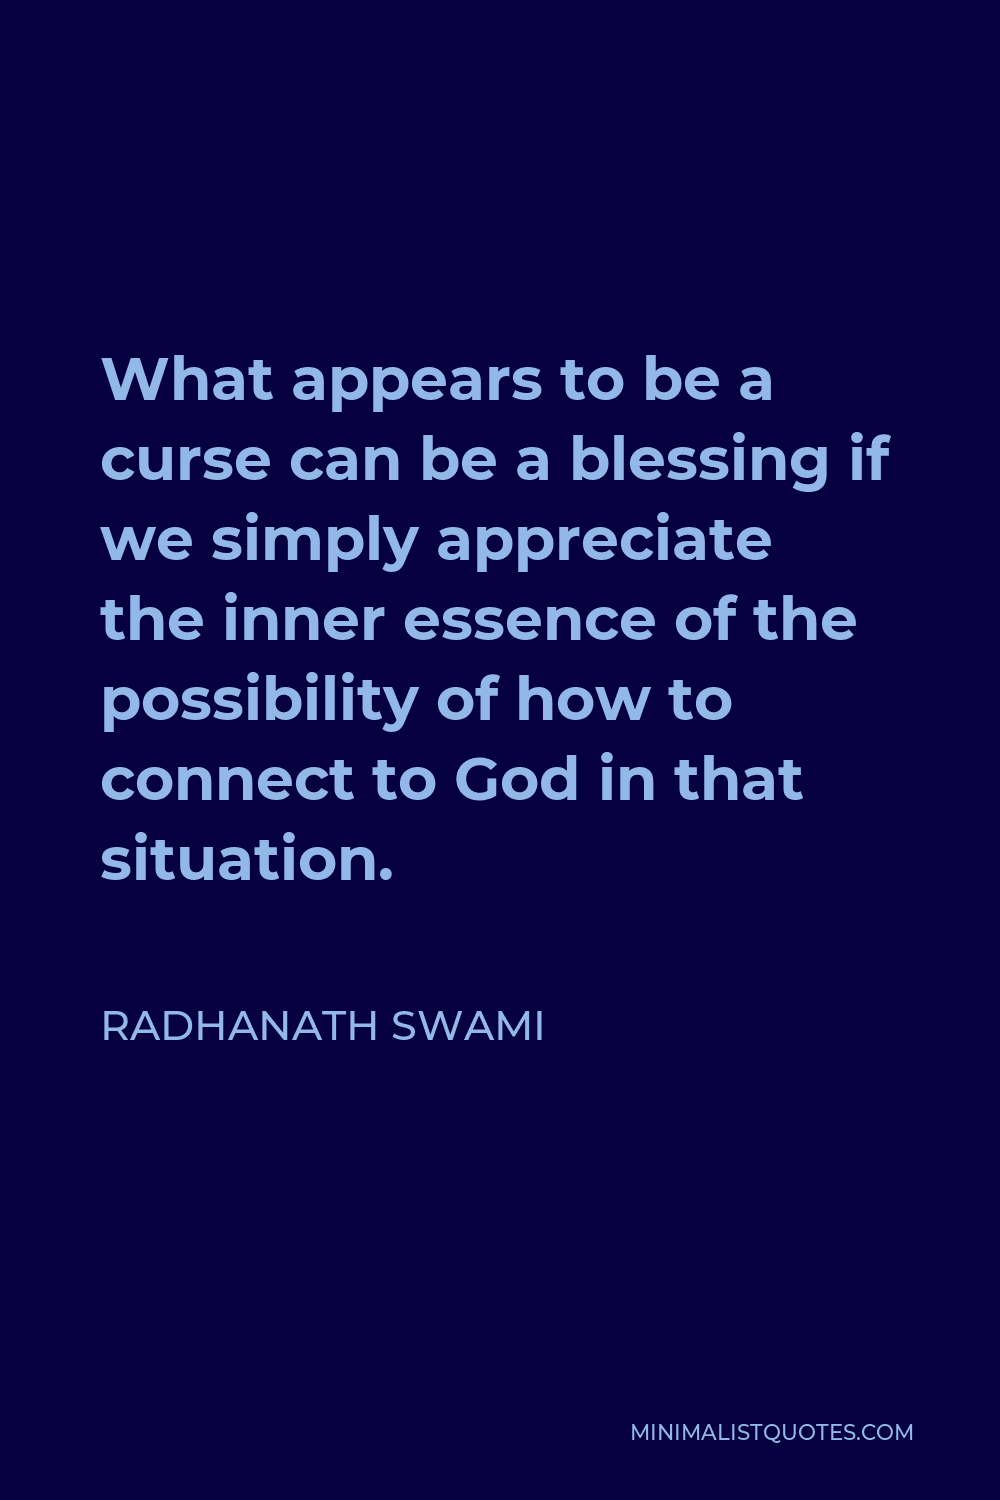 Radhanath Swami Quote - What appears to be a curse can be a blessing if we simply appreciate the inner essence of the possibility of how to connect to God in that situation.